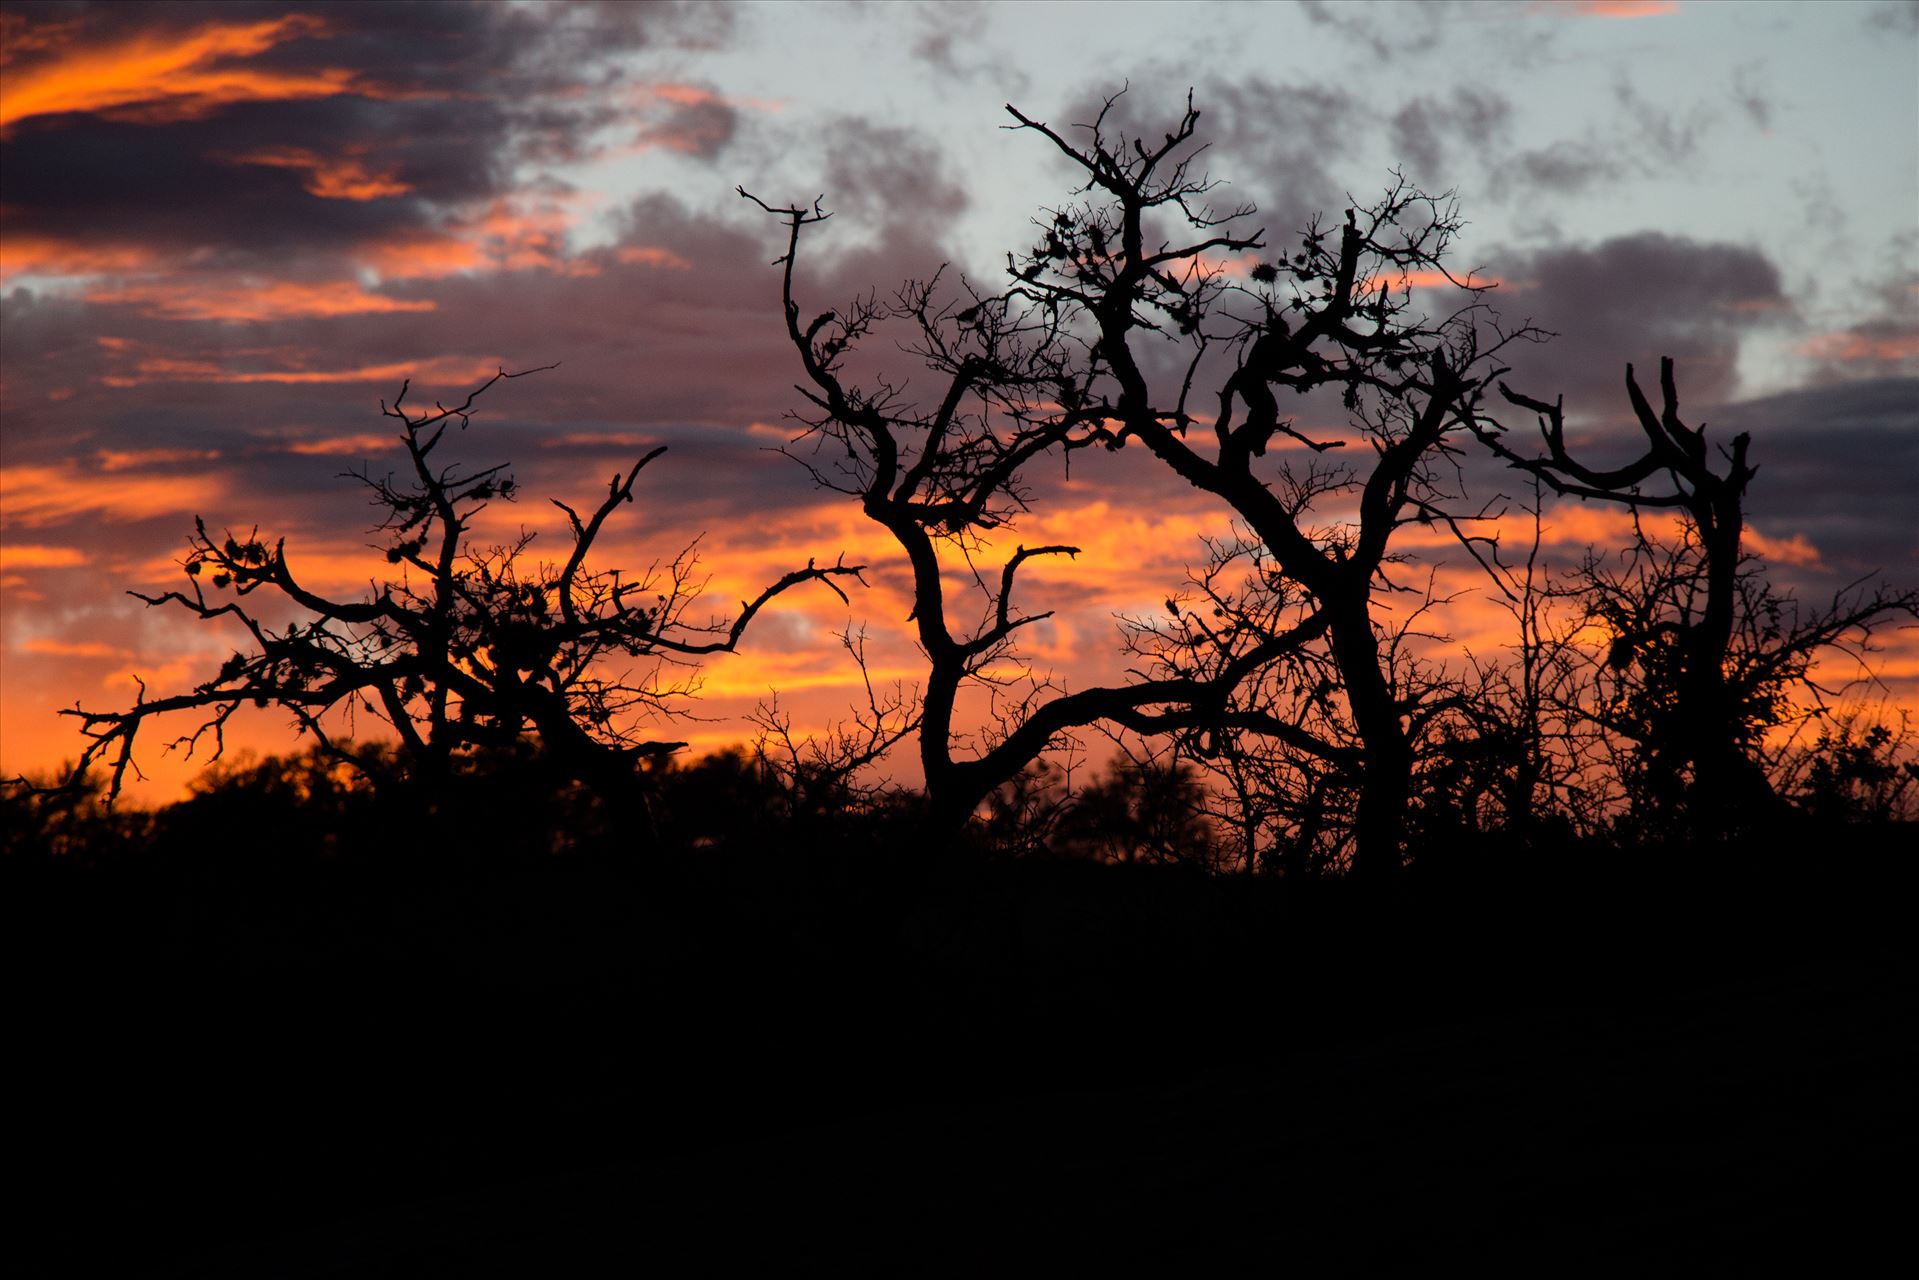 20140112-Enchanted Rock-DSLR-084.jpg  by Charles Smith Photography